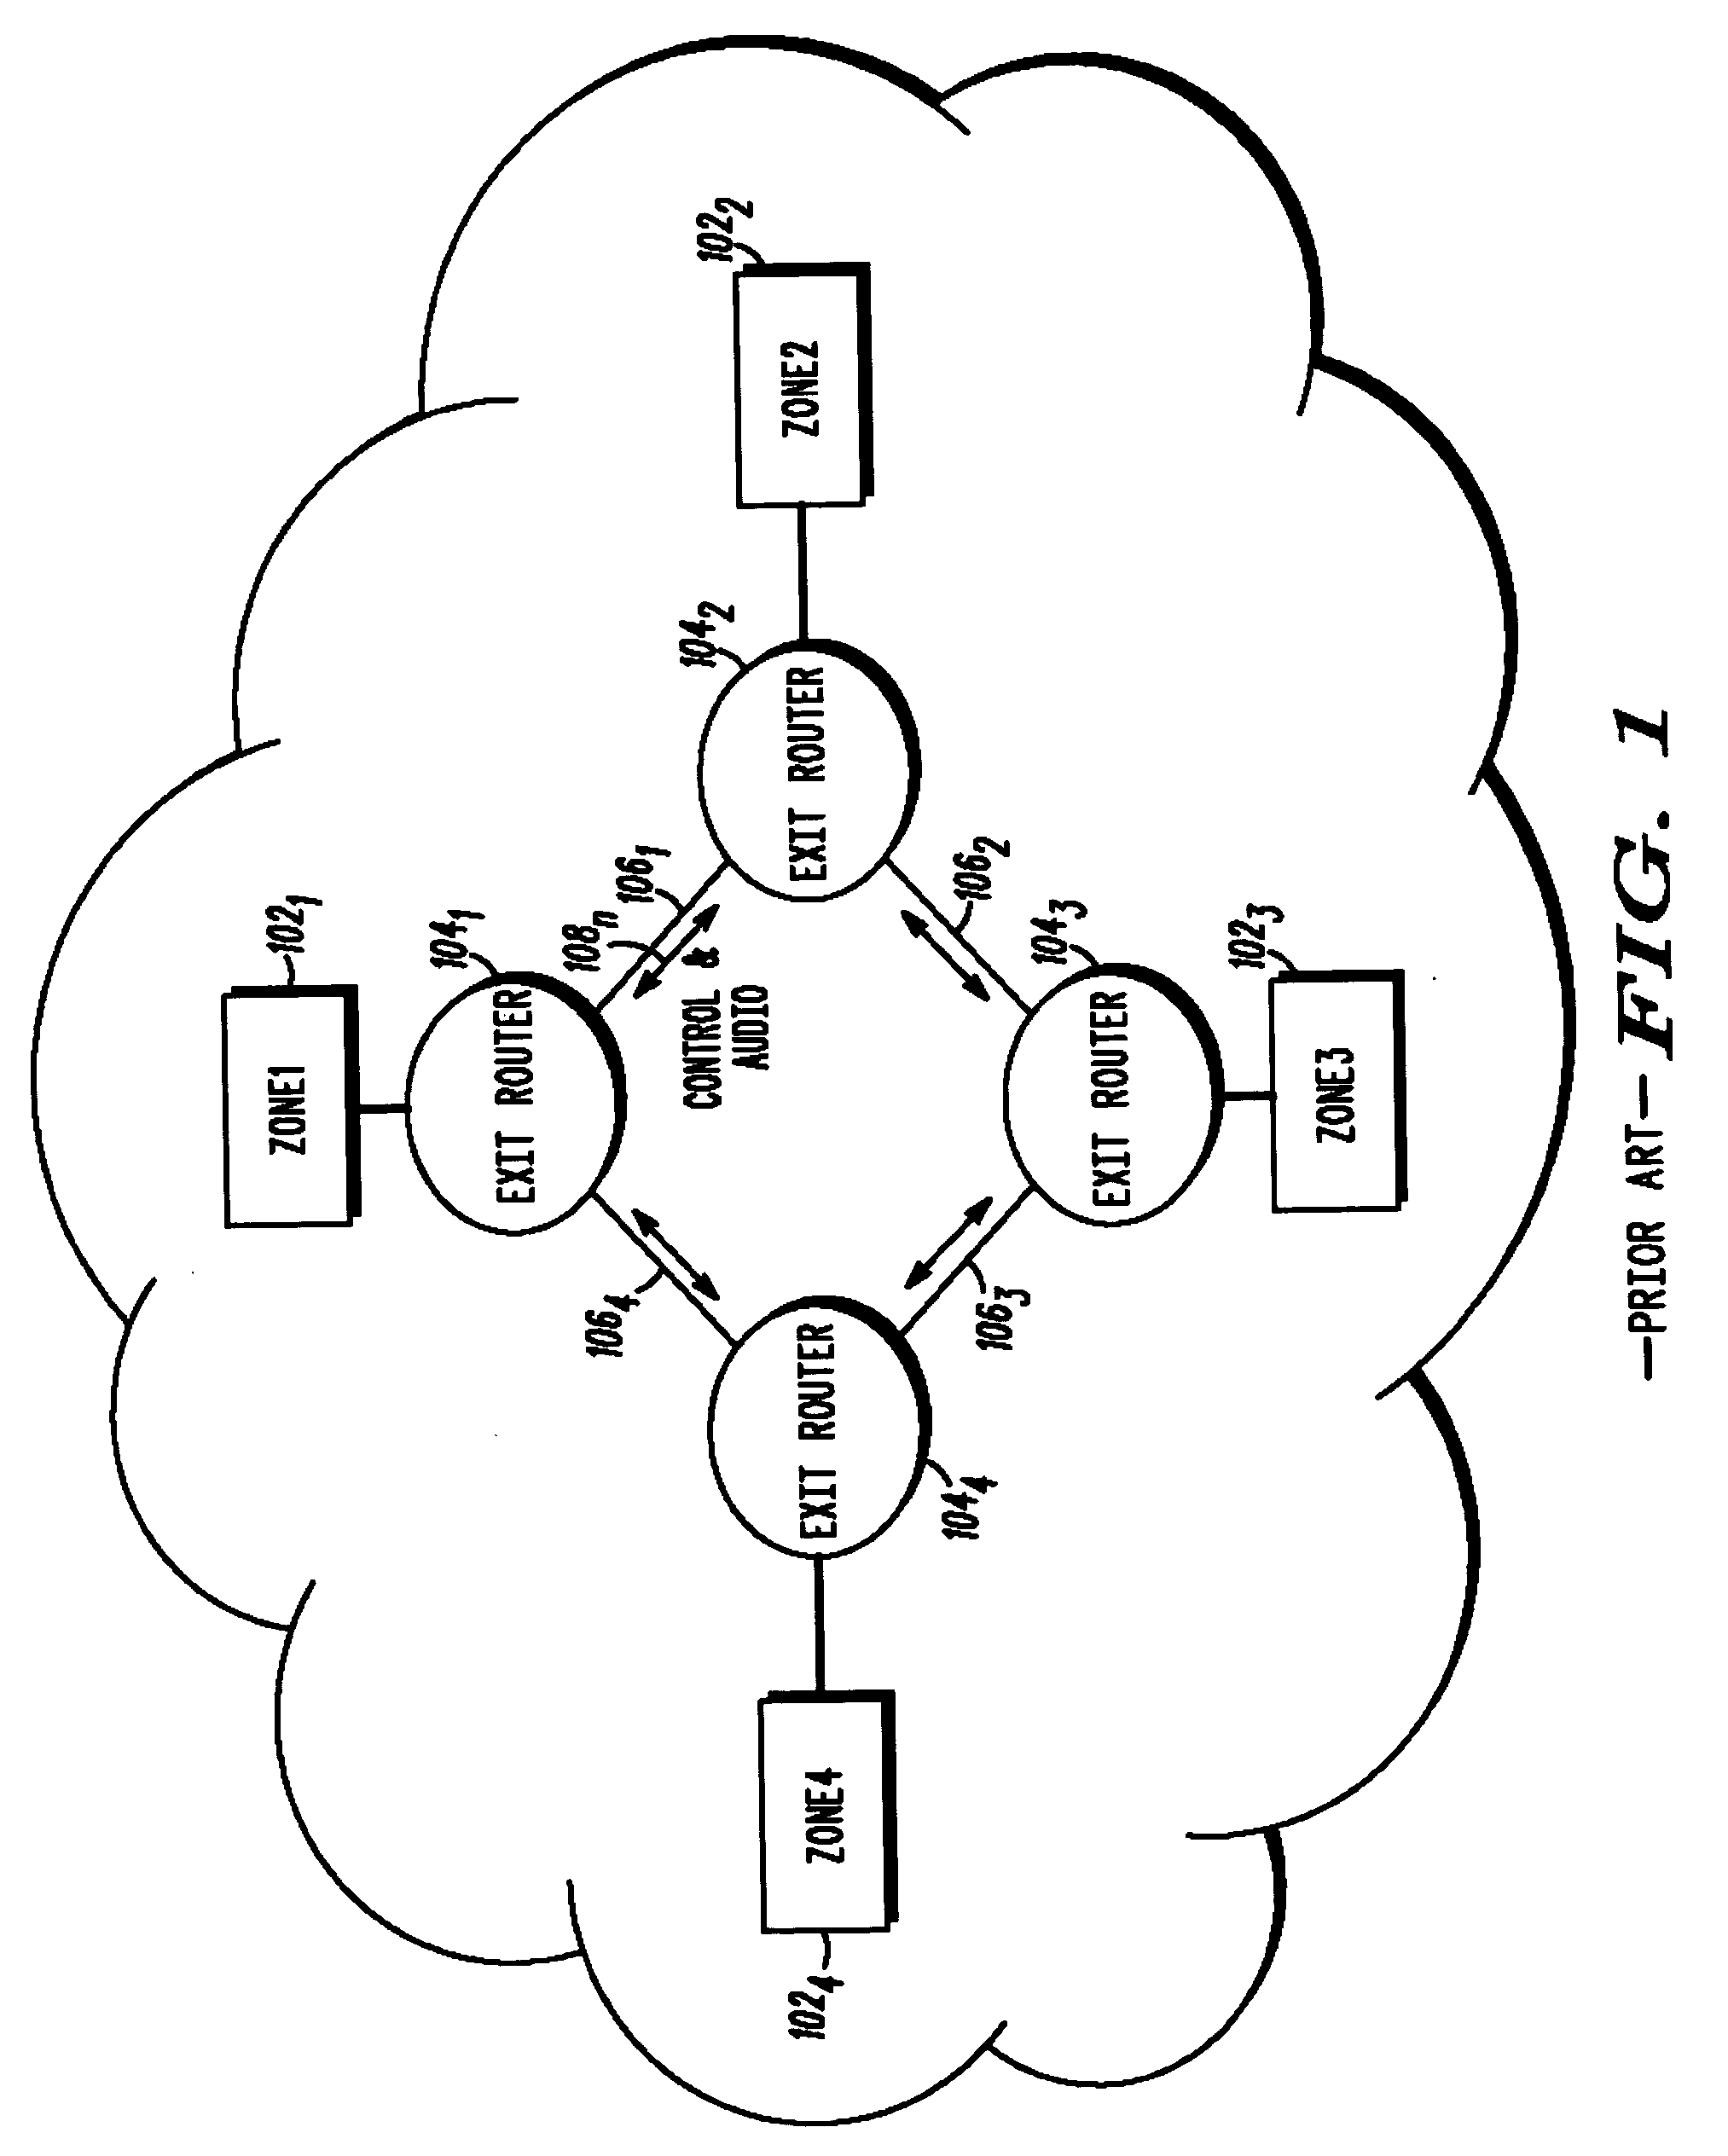 Method for managing inter-zone bandwidth in a two-way messaging network